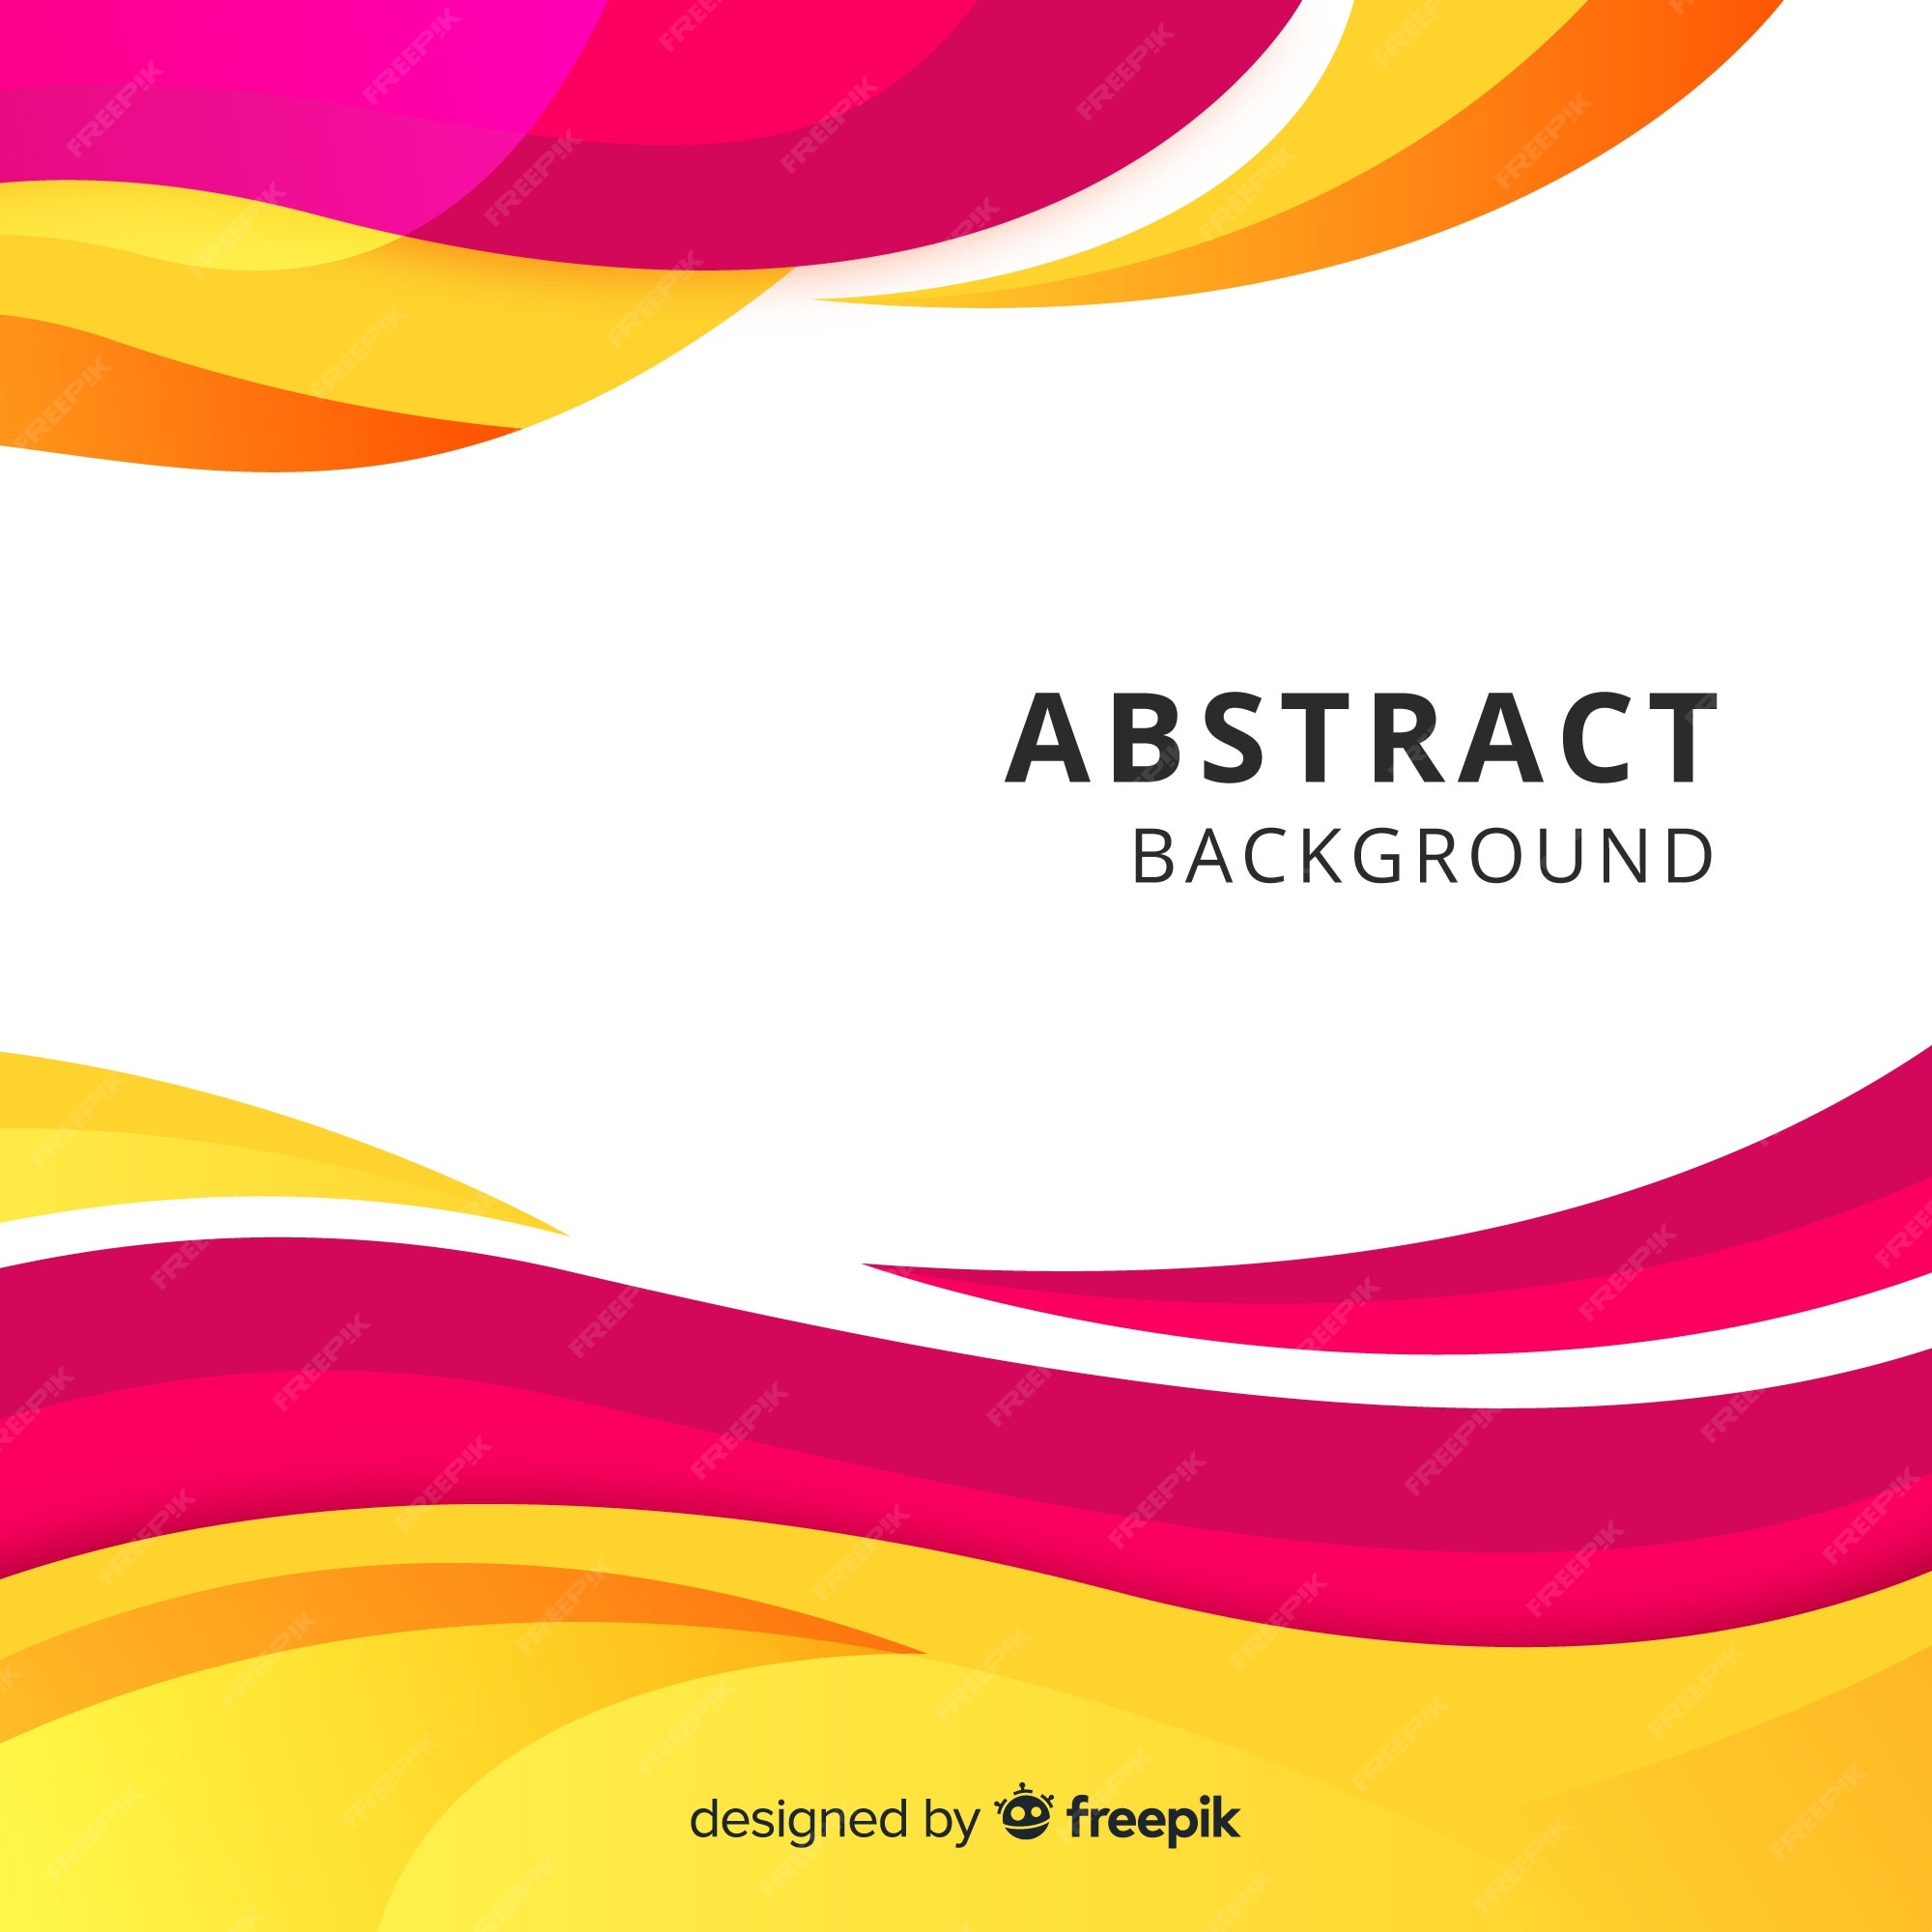 Premium Vector | Abstract background